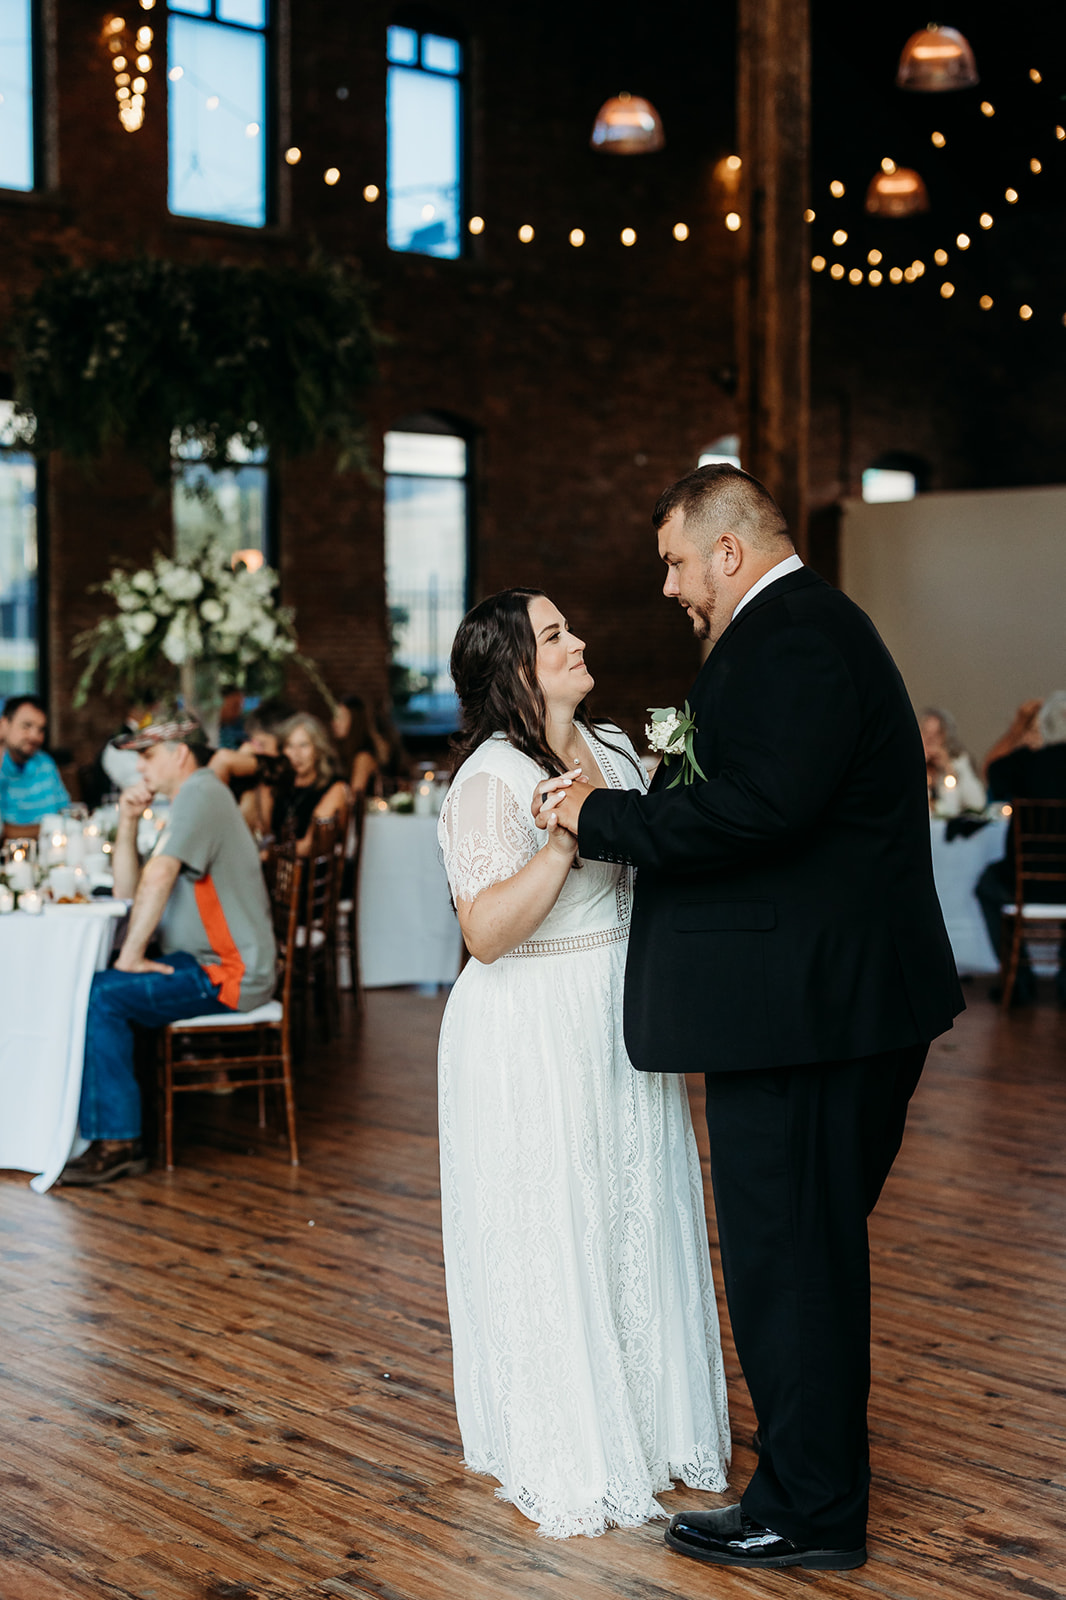 First dance for bride and groom at the refinery in Jeffersonville, Indiana